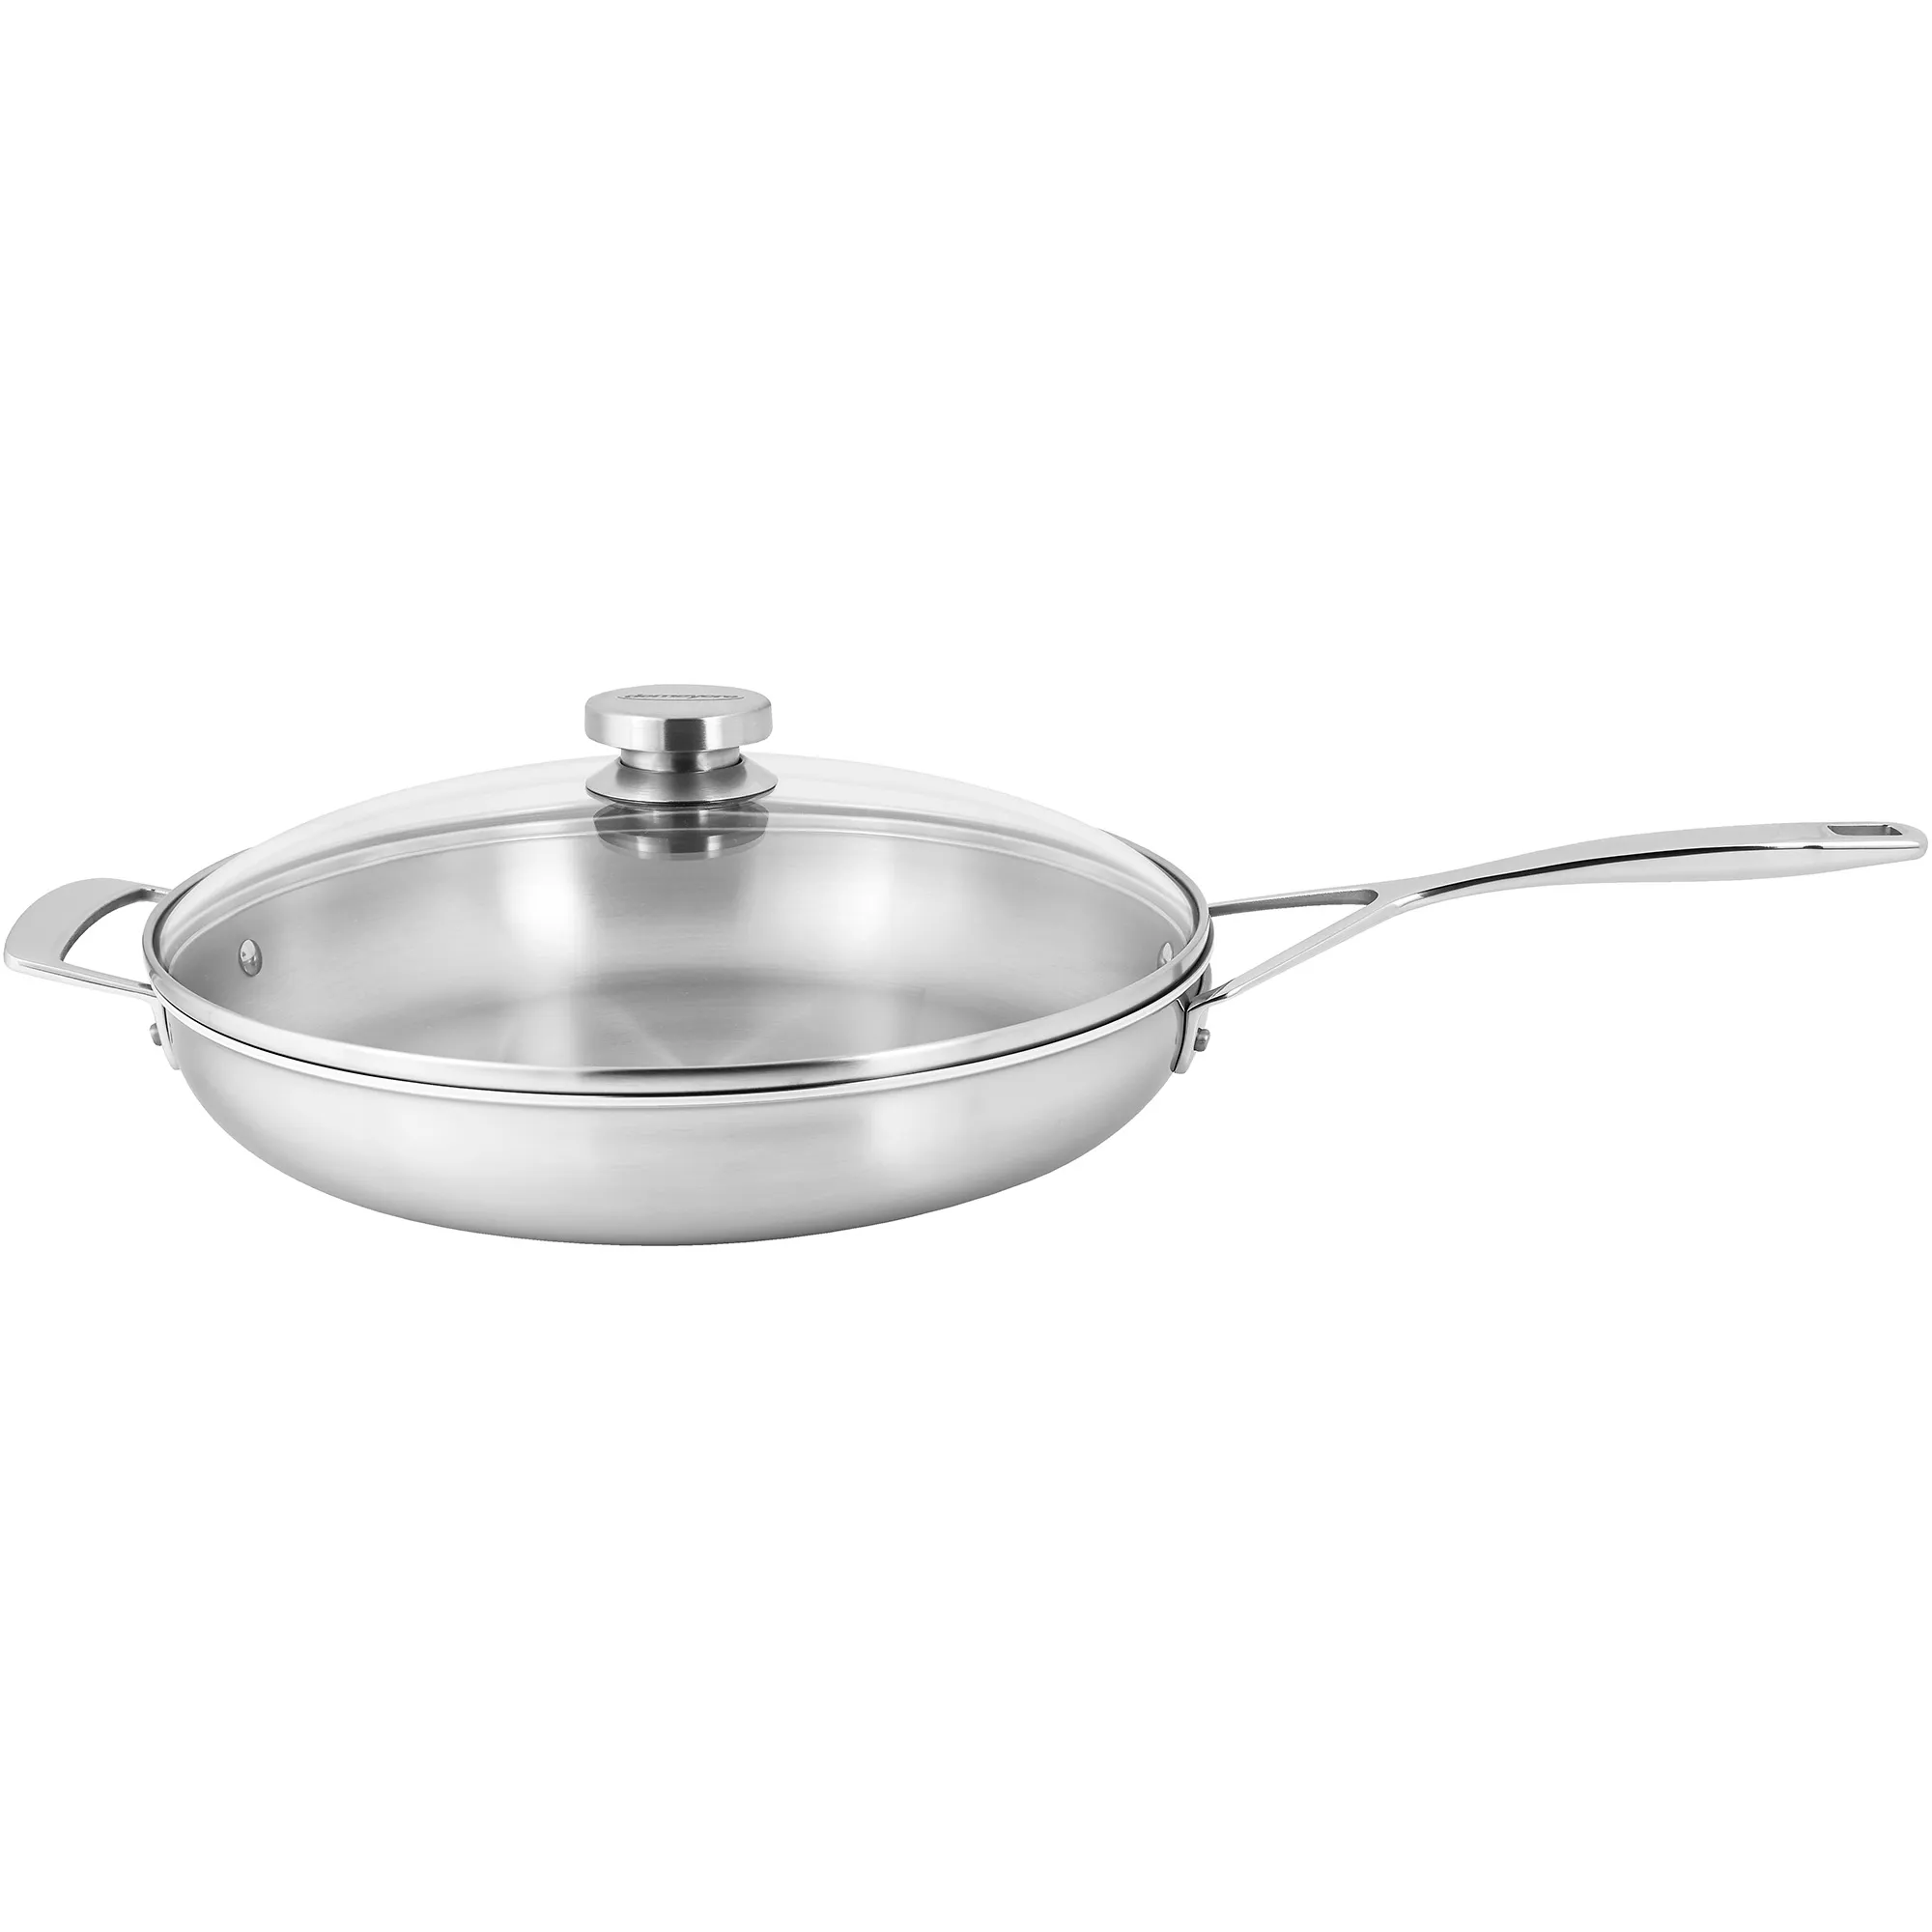 https://www.homethreads.com/files/zwilling/20632gd-demeyere-essential-5-ply-125-inch-stainless-steel-fry-pan-with-lid.webp